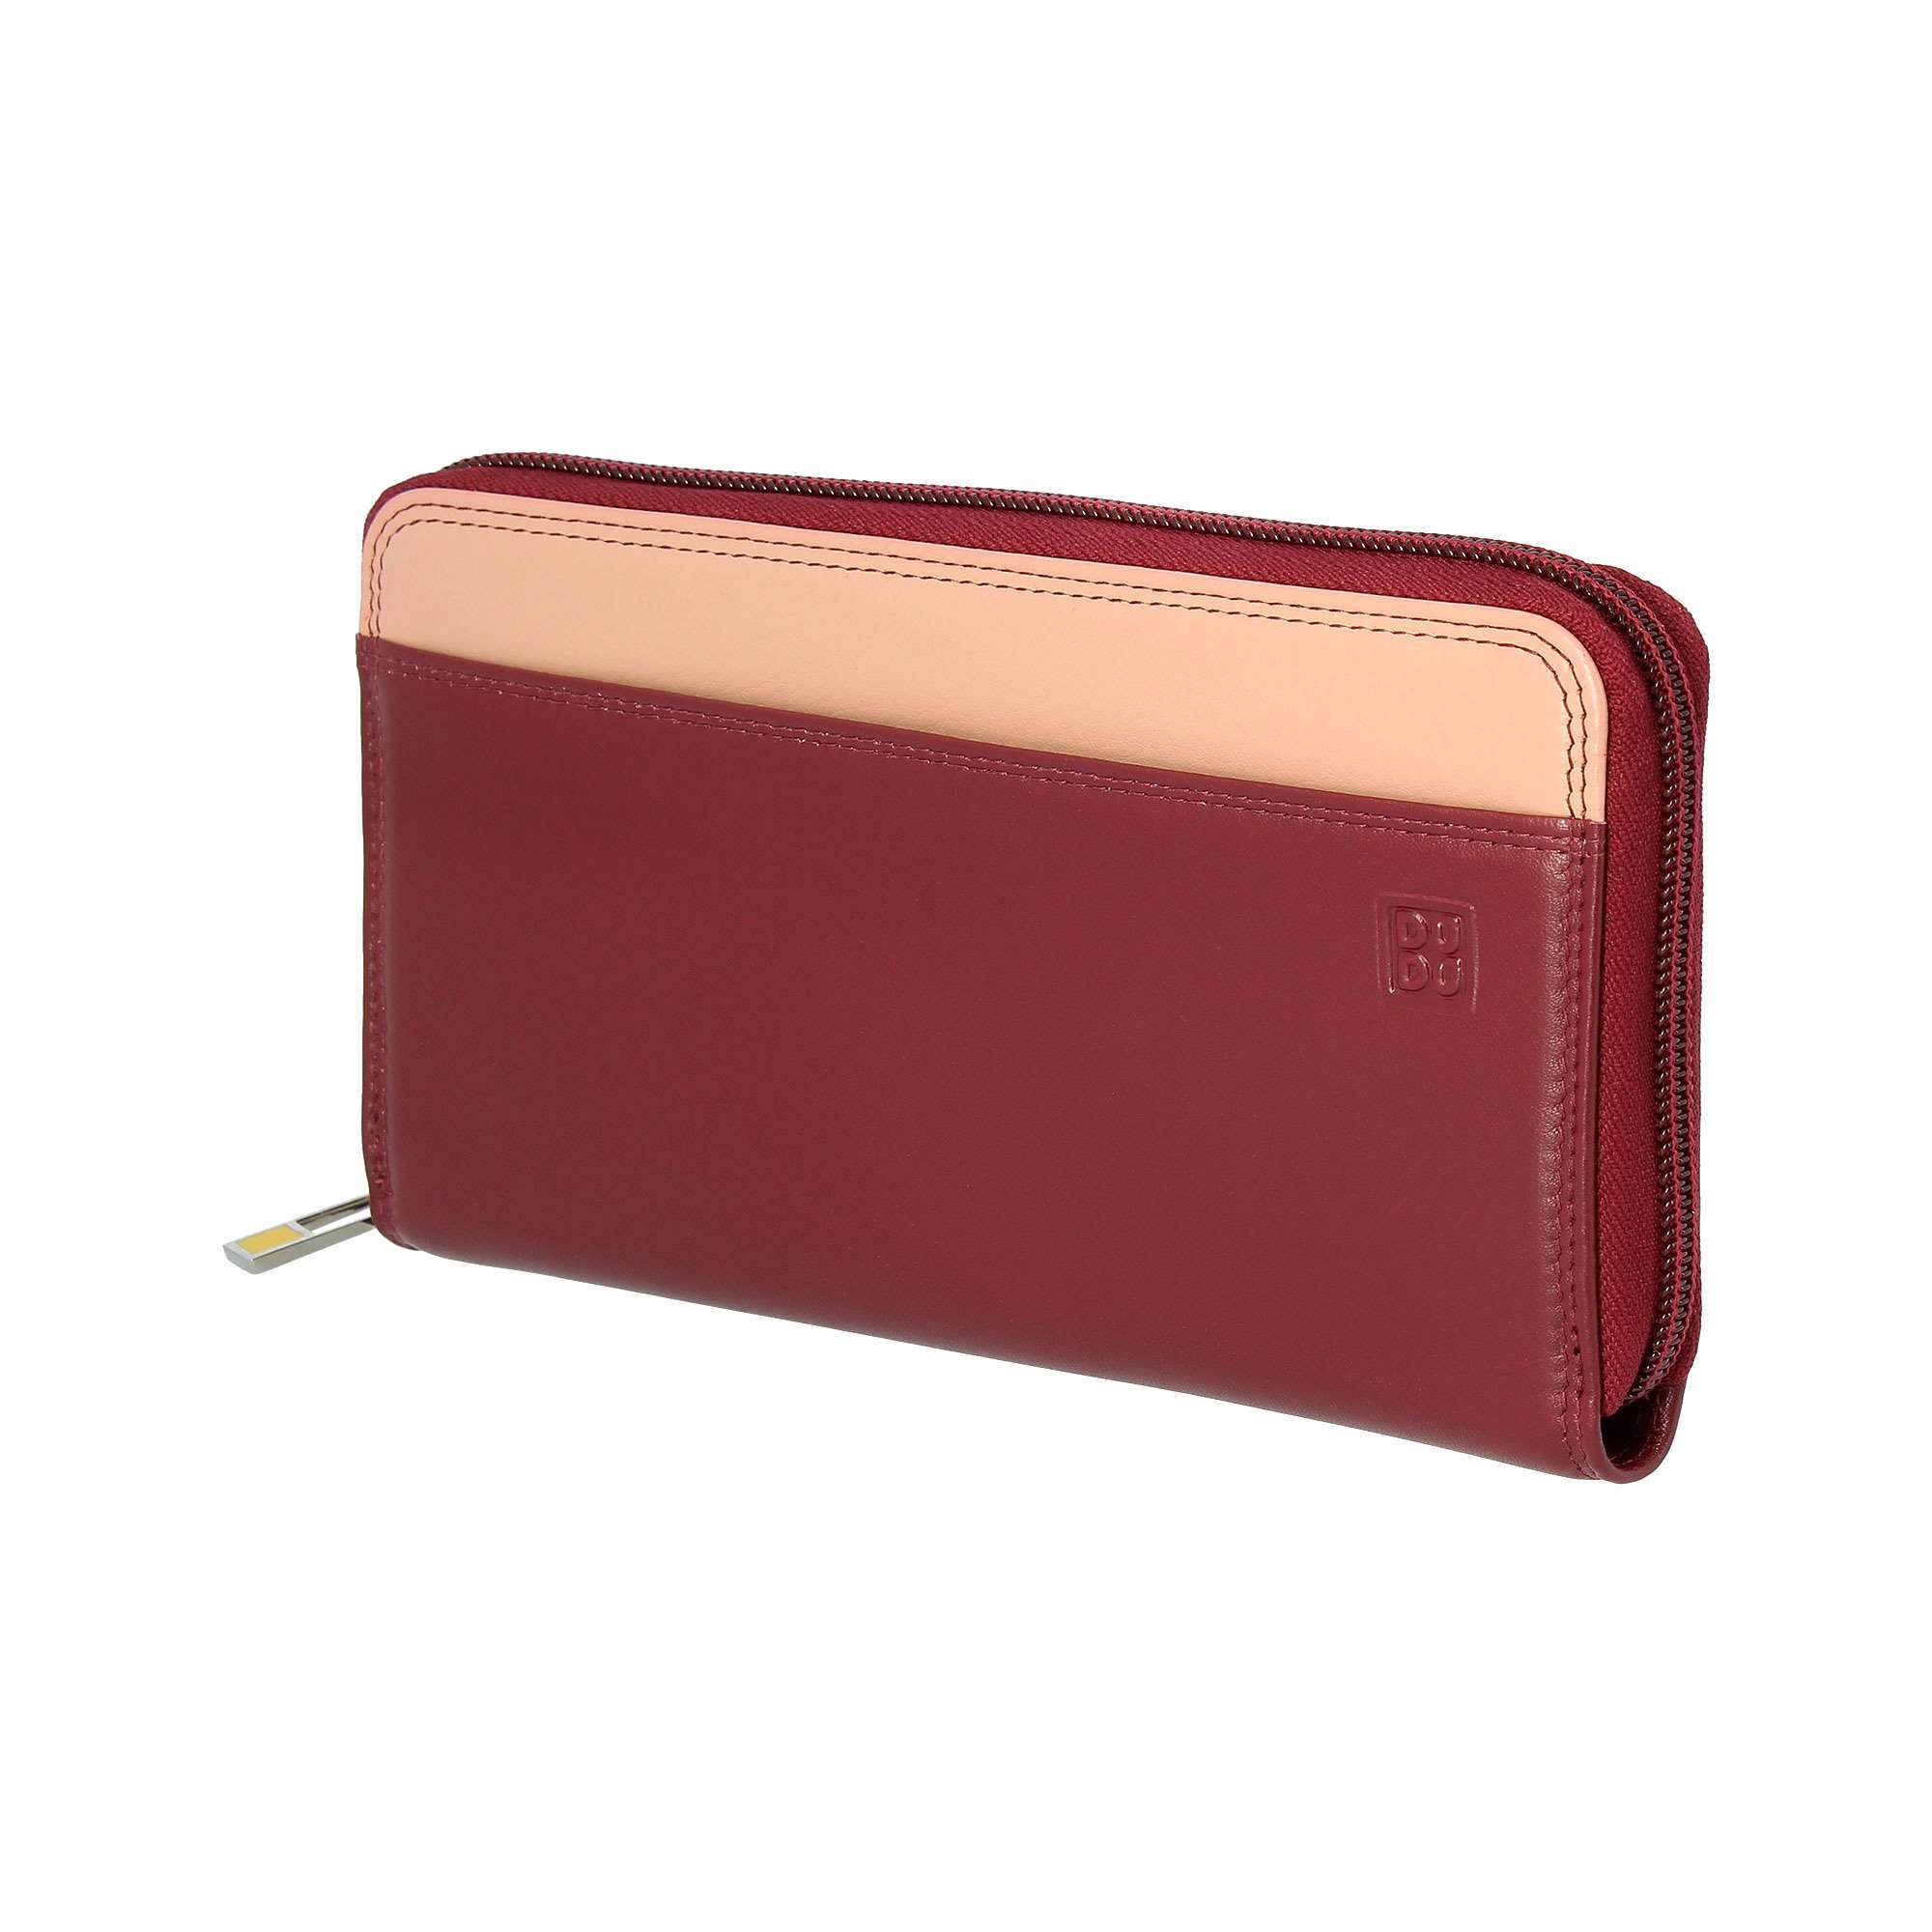 Portefeuille - Colorful - Mauritius - Burgundy - Femme